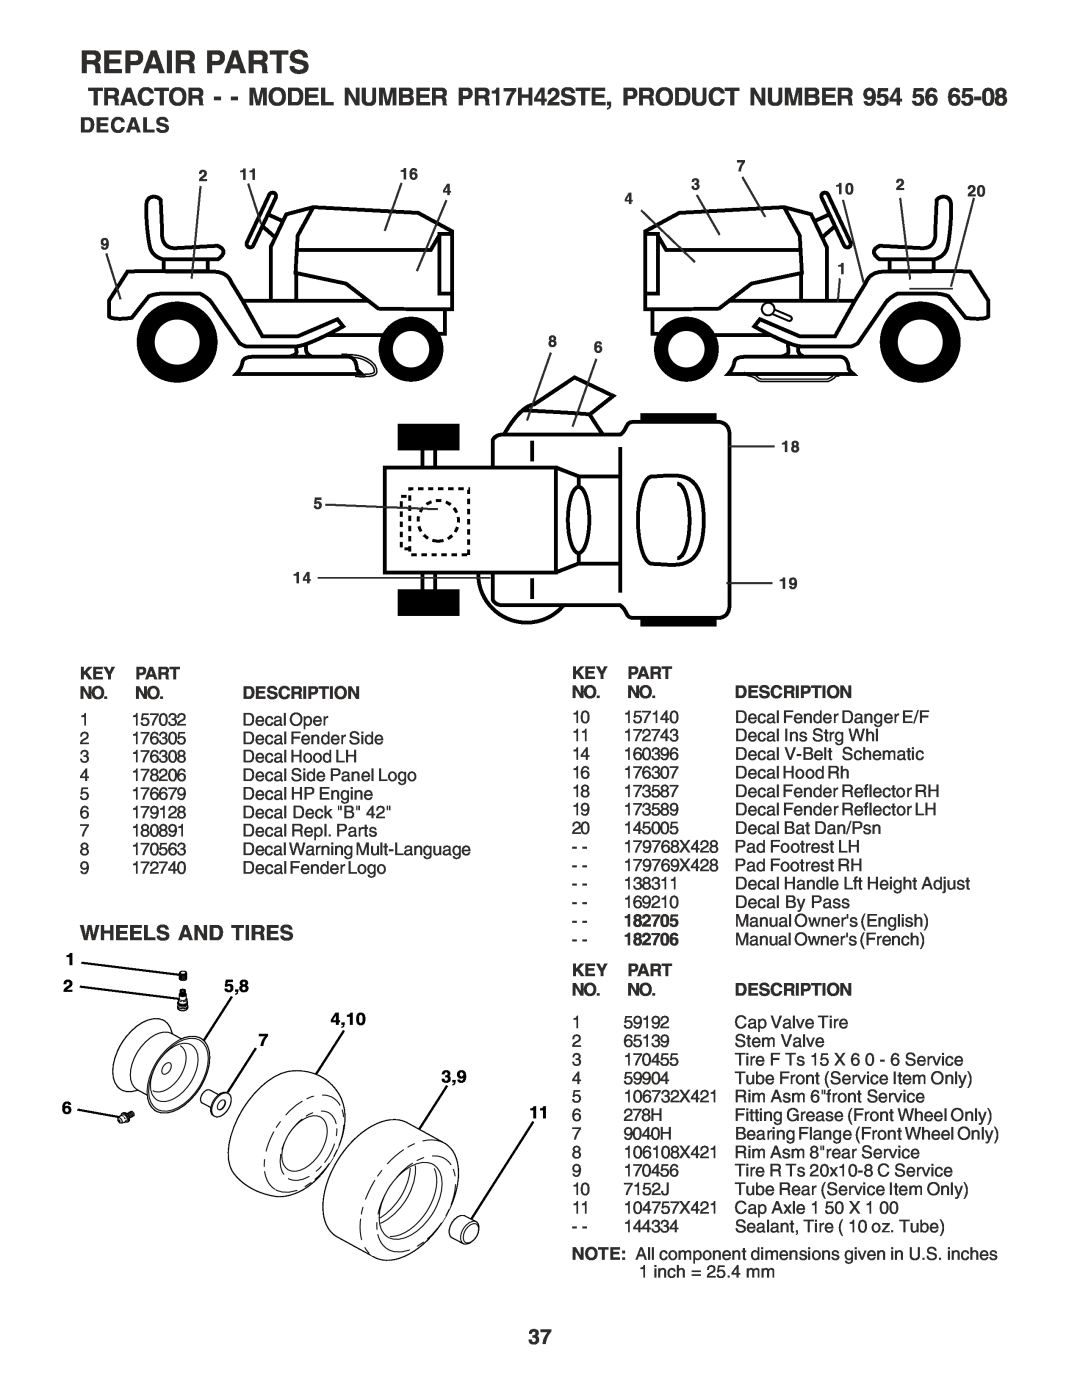 Poulan owner manual Decals, Wheels And Tires, Repair Parts, TRACTOR - - MODEL NUMBER PR17H42STE, PRODUCT NUMBER 954 